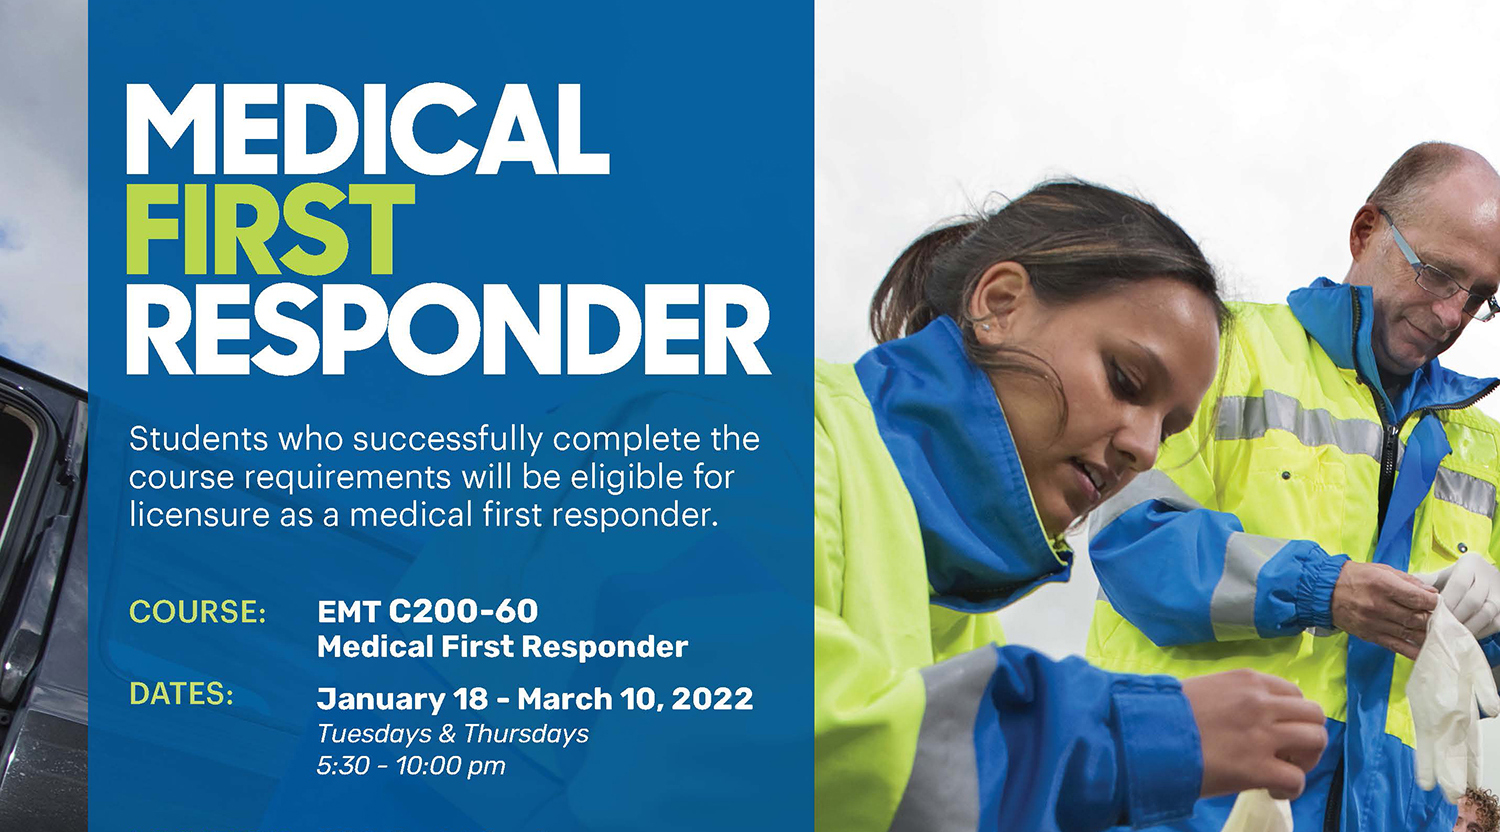 KCC offering Medical First Responder training in Coldwater starting Jan. 18  - KCC Daily